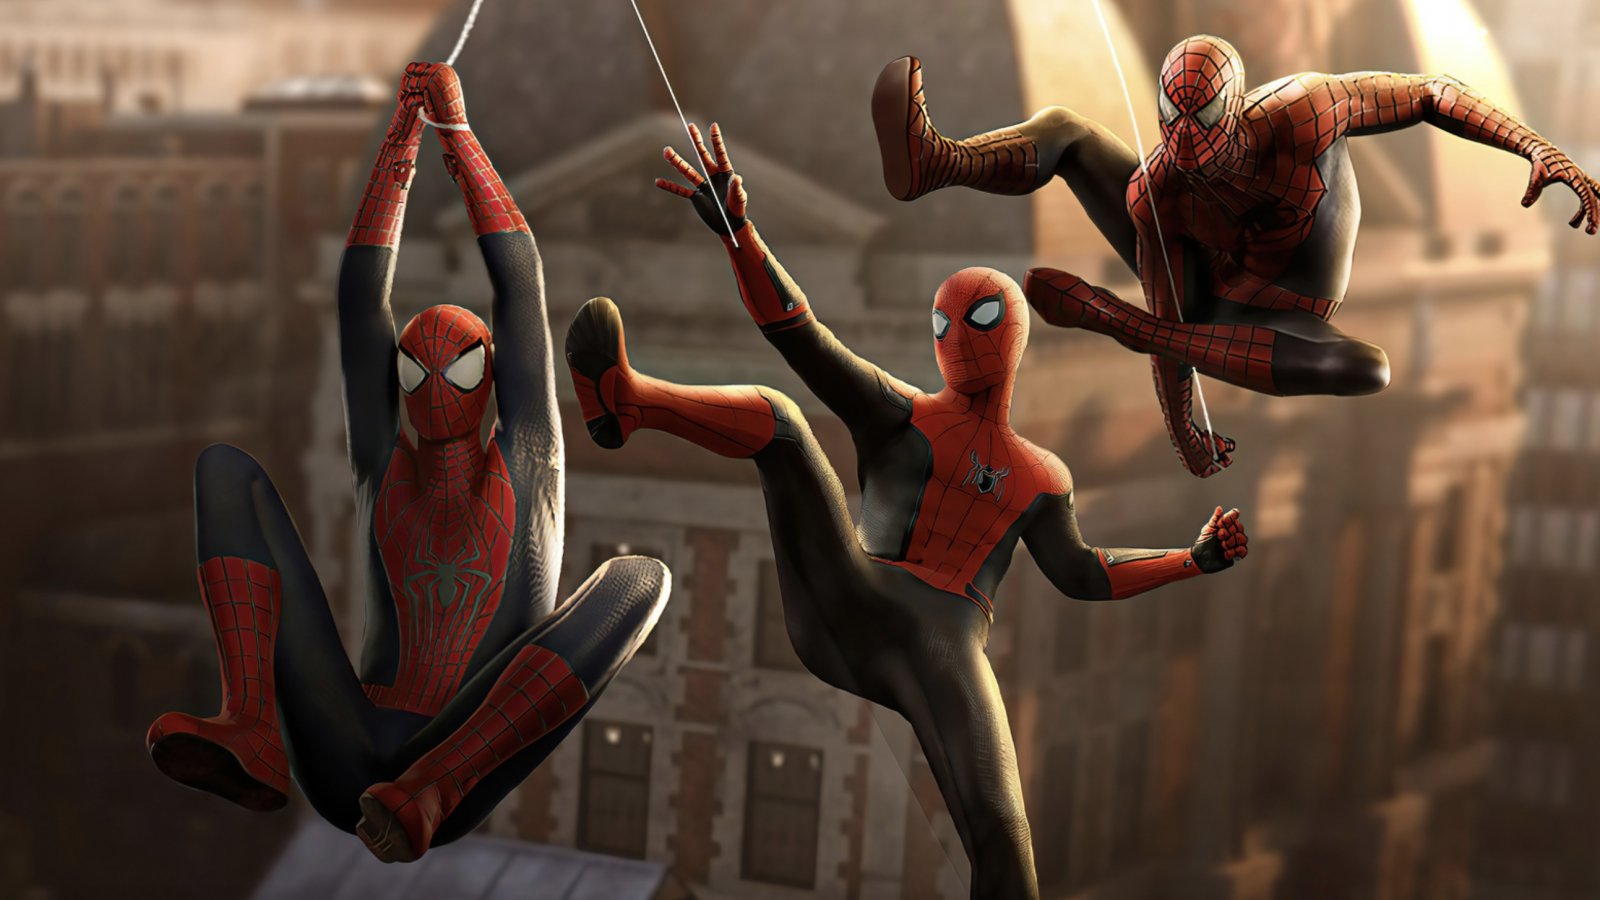 'Spider-Man: No Way Home' Director Confirms Fan Hypotheses About Movie's Ending